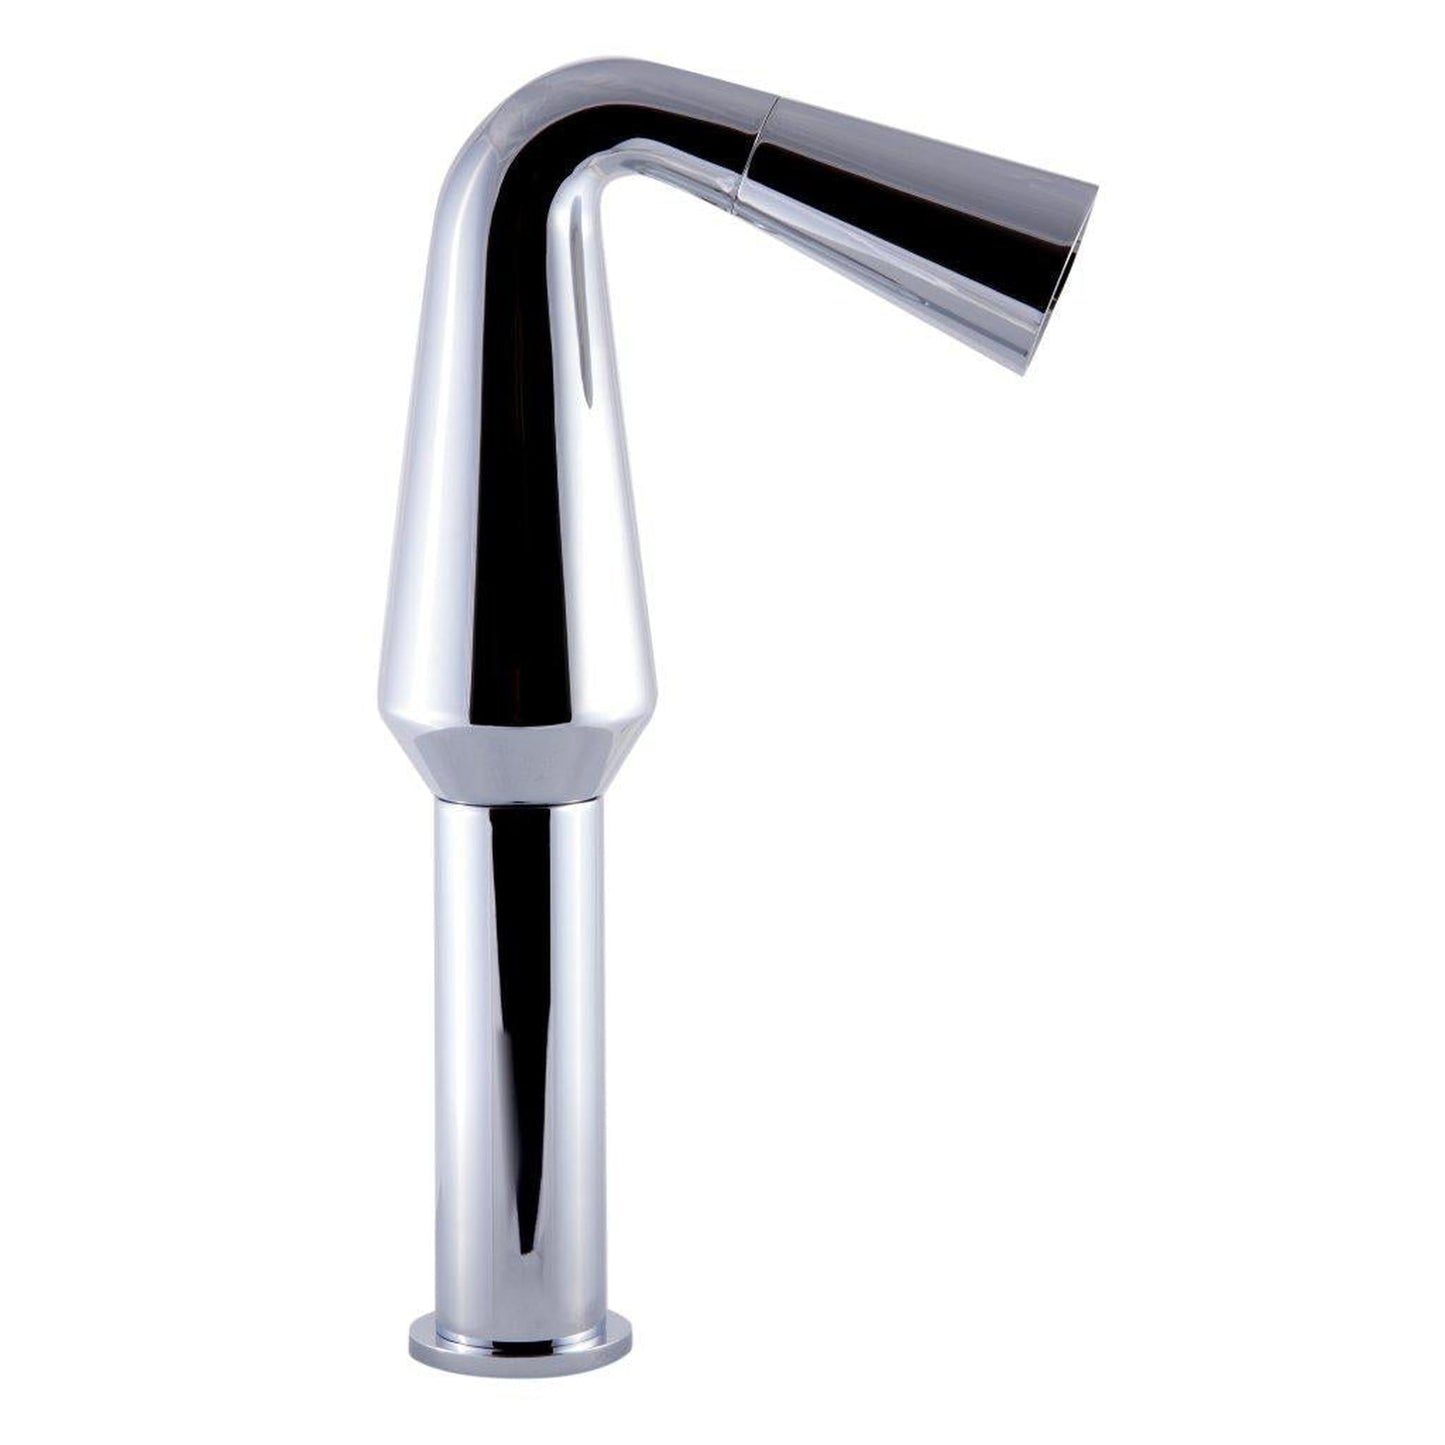 ALFI Brand AB1792-PC Polished Chrome Vessel Cone Waterfall Spout Brass Bathroom Sink Faucet With Single Lever